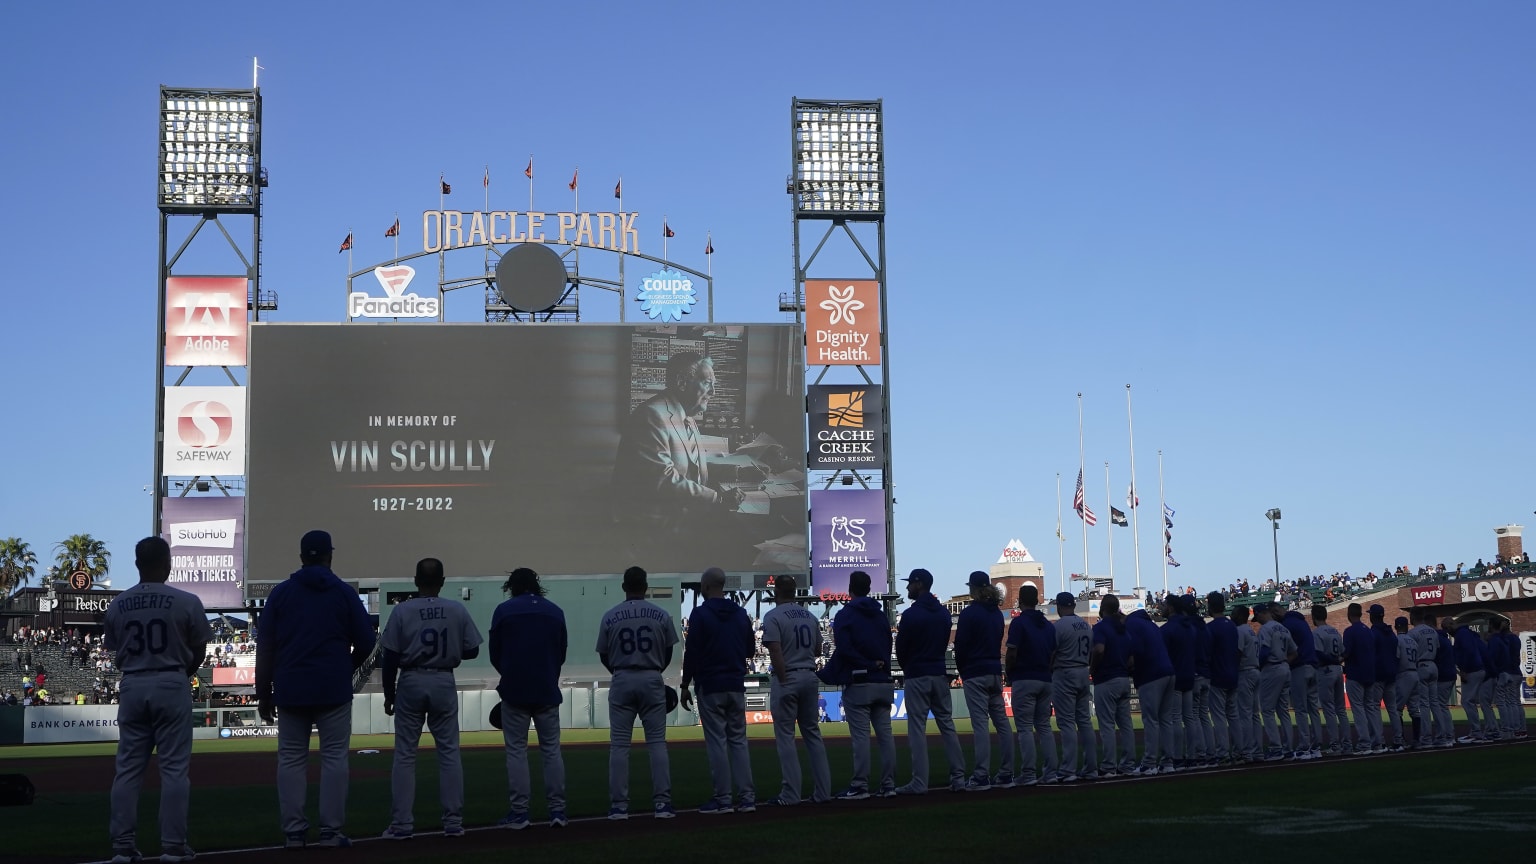 Players stand in shadow as the Oracle Park scoreboard shows an image of Vin Scully